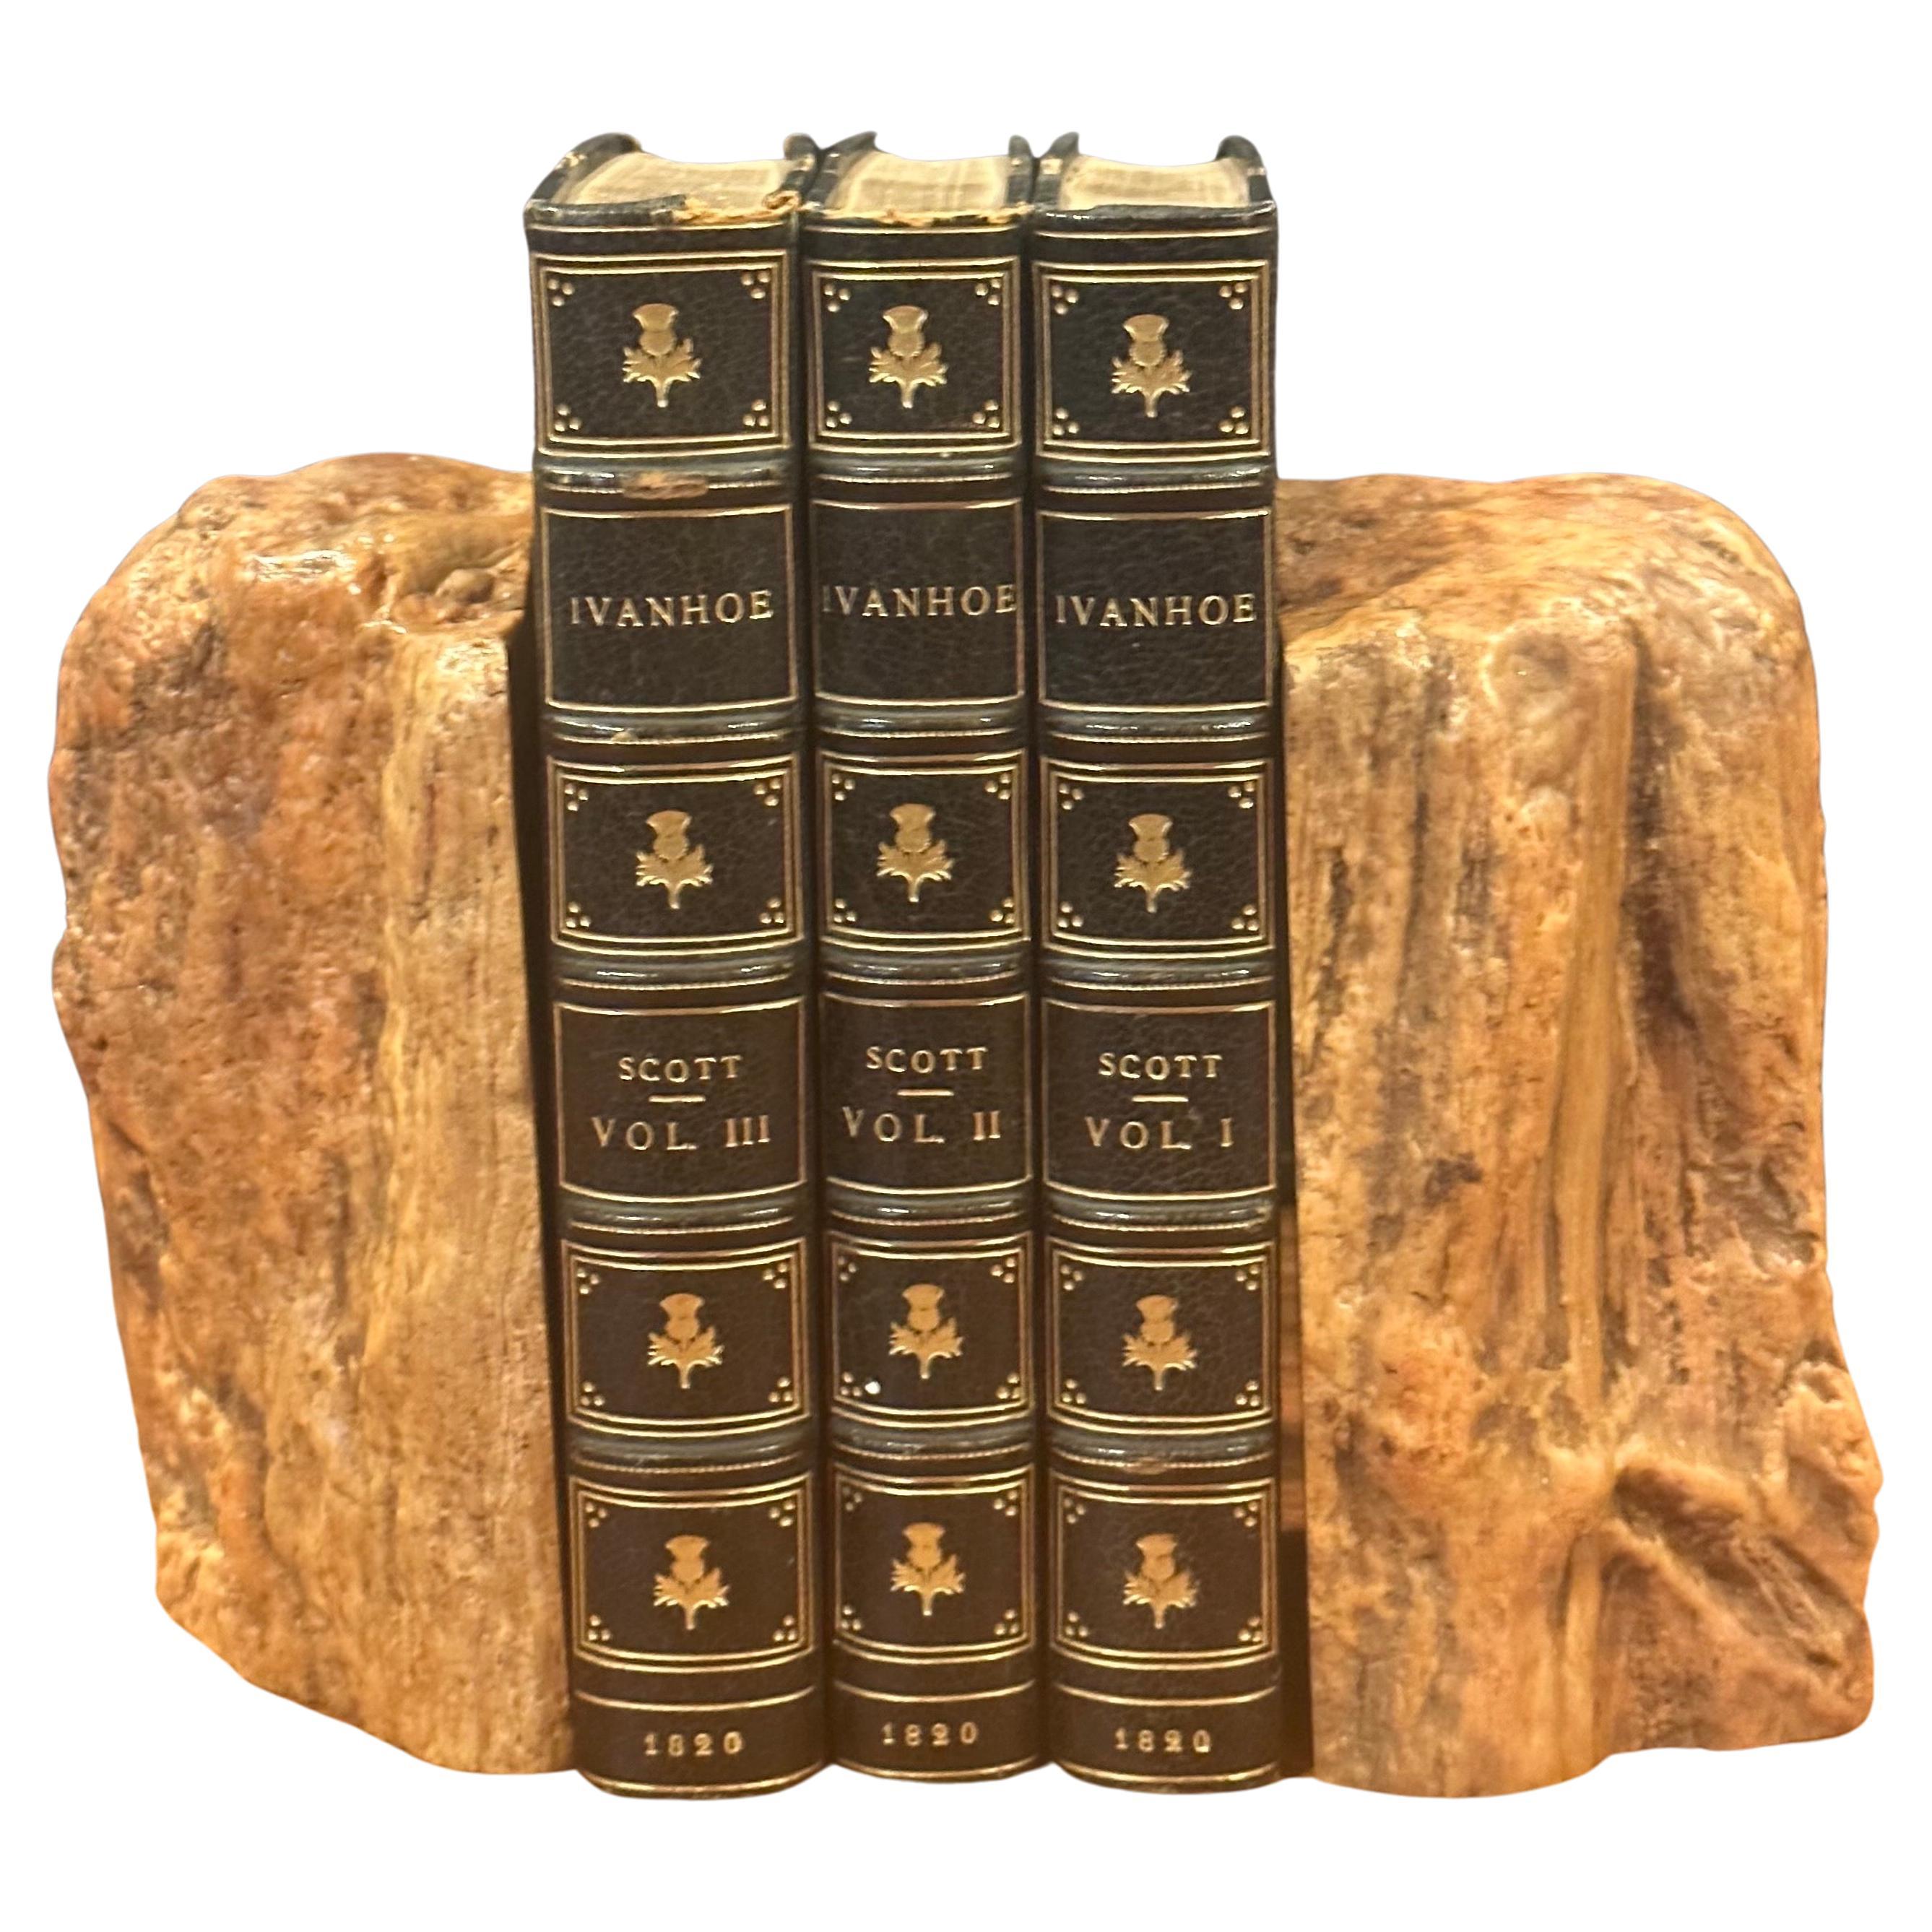 An impressive pair of petrified wood bookends, circa pre-history.  The bookends were formed by fossilization over millions of years and are finished with the exterior edges retaining raw, organic texture.  The set is in very good condition with no